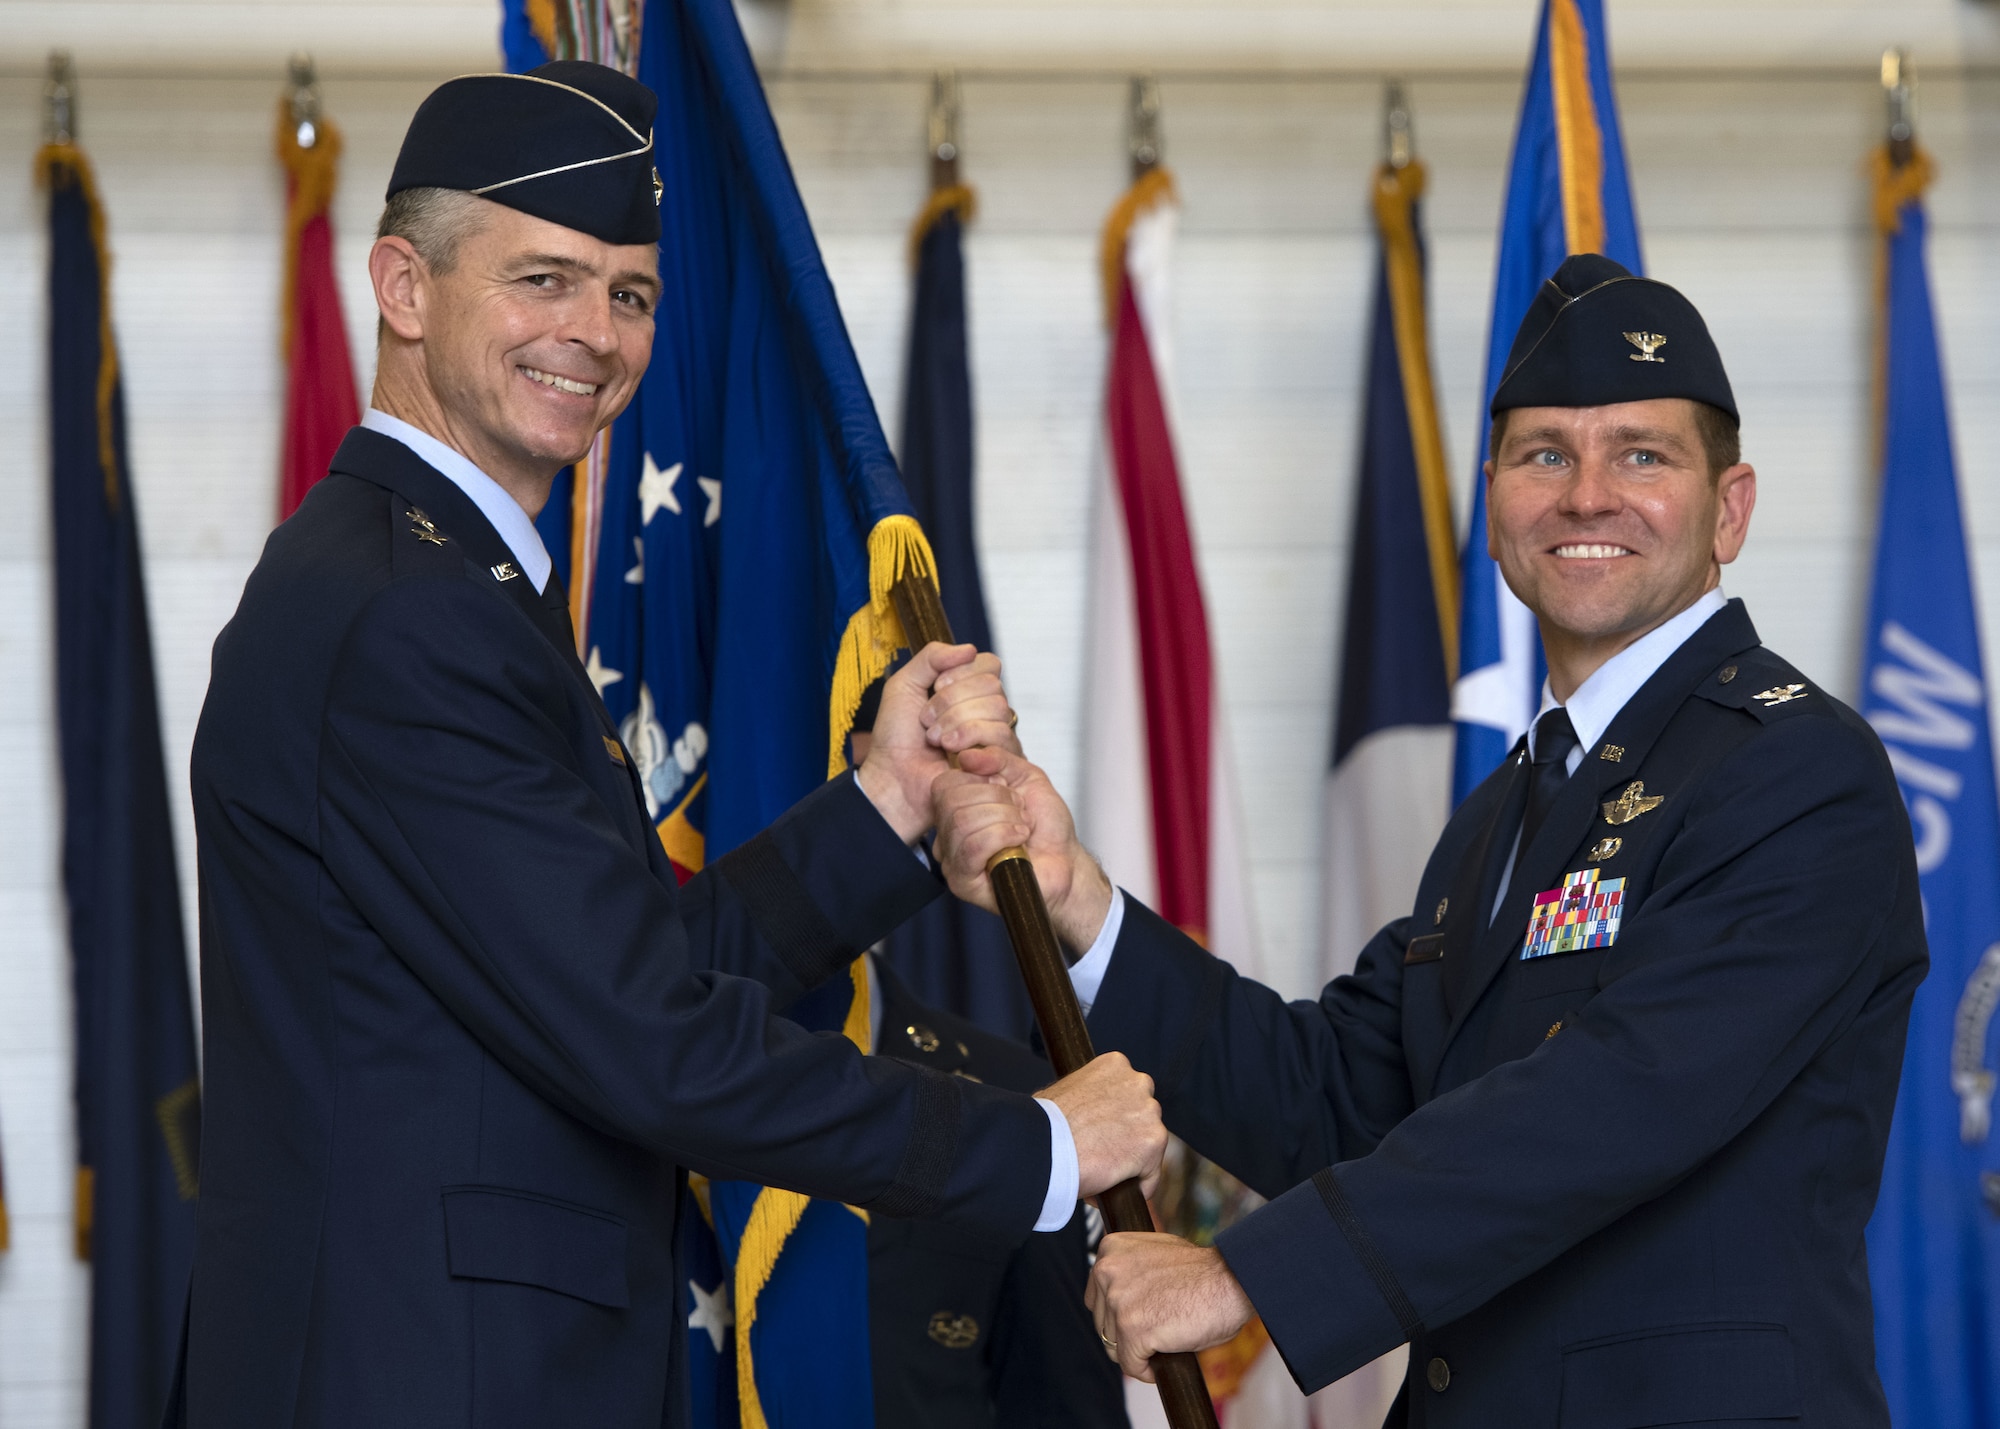 U.S. Air Force Col. Jon Wheeler, incoming 33rd Fighter Wing commander, takes the guidon from U.S. Maj. Gen. Craig Wills, 19th AF commander, during a change of command ceremony at Eglin Air Force Base, Florida, June 18, 2019.